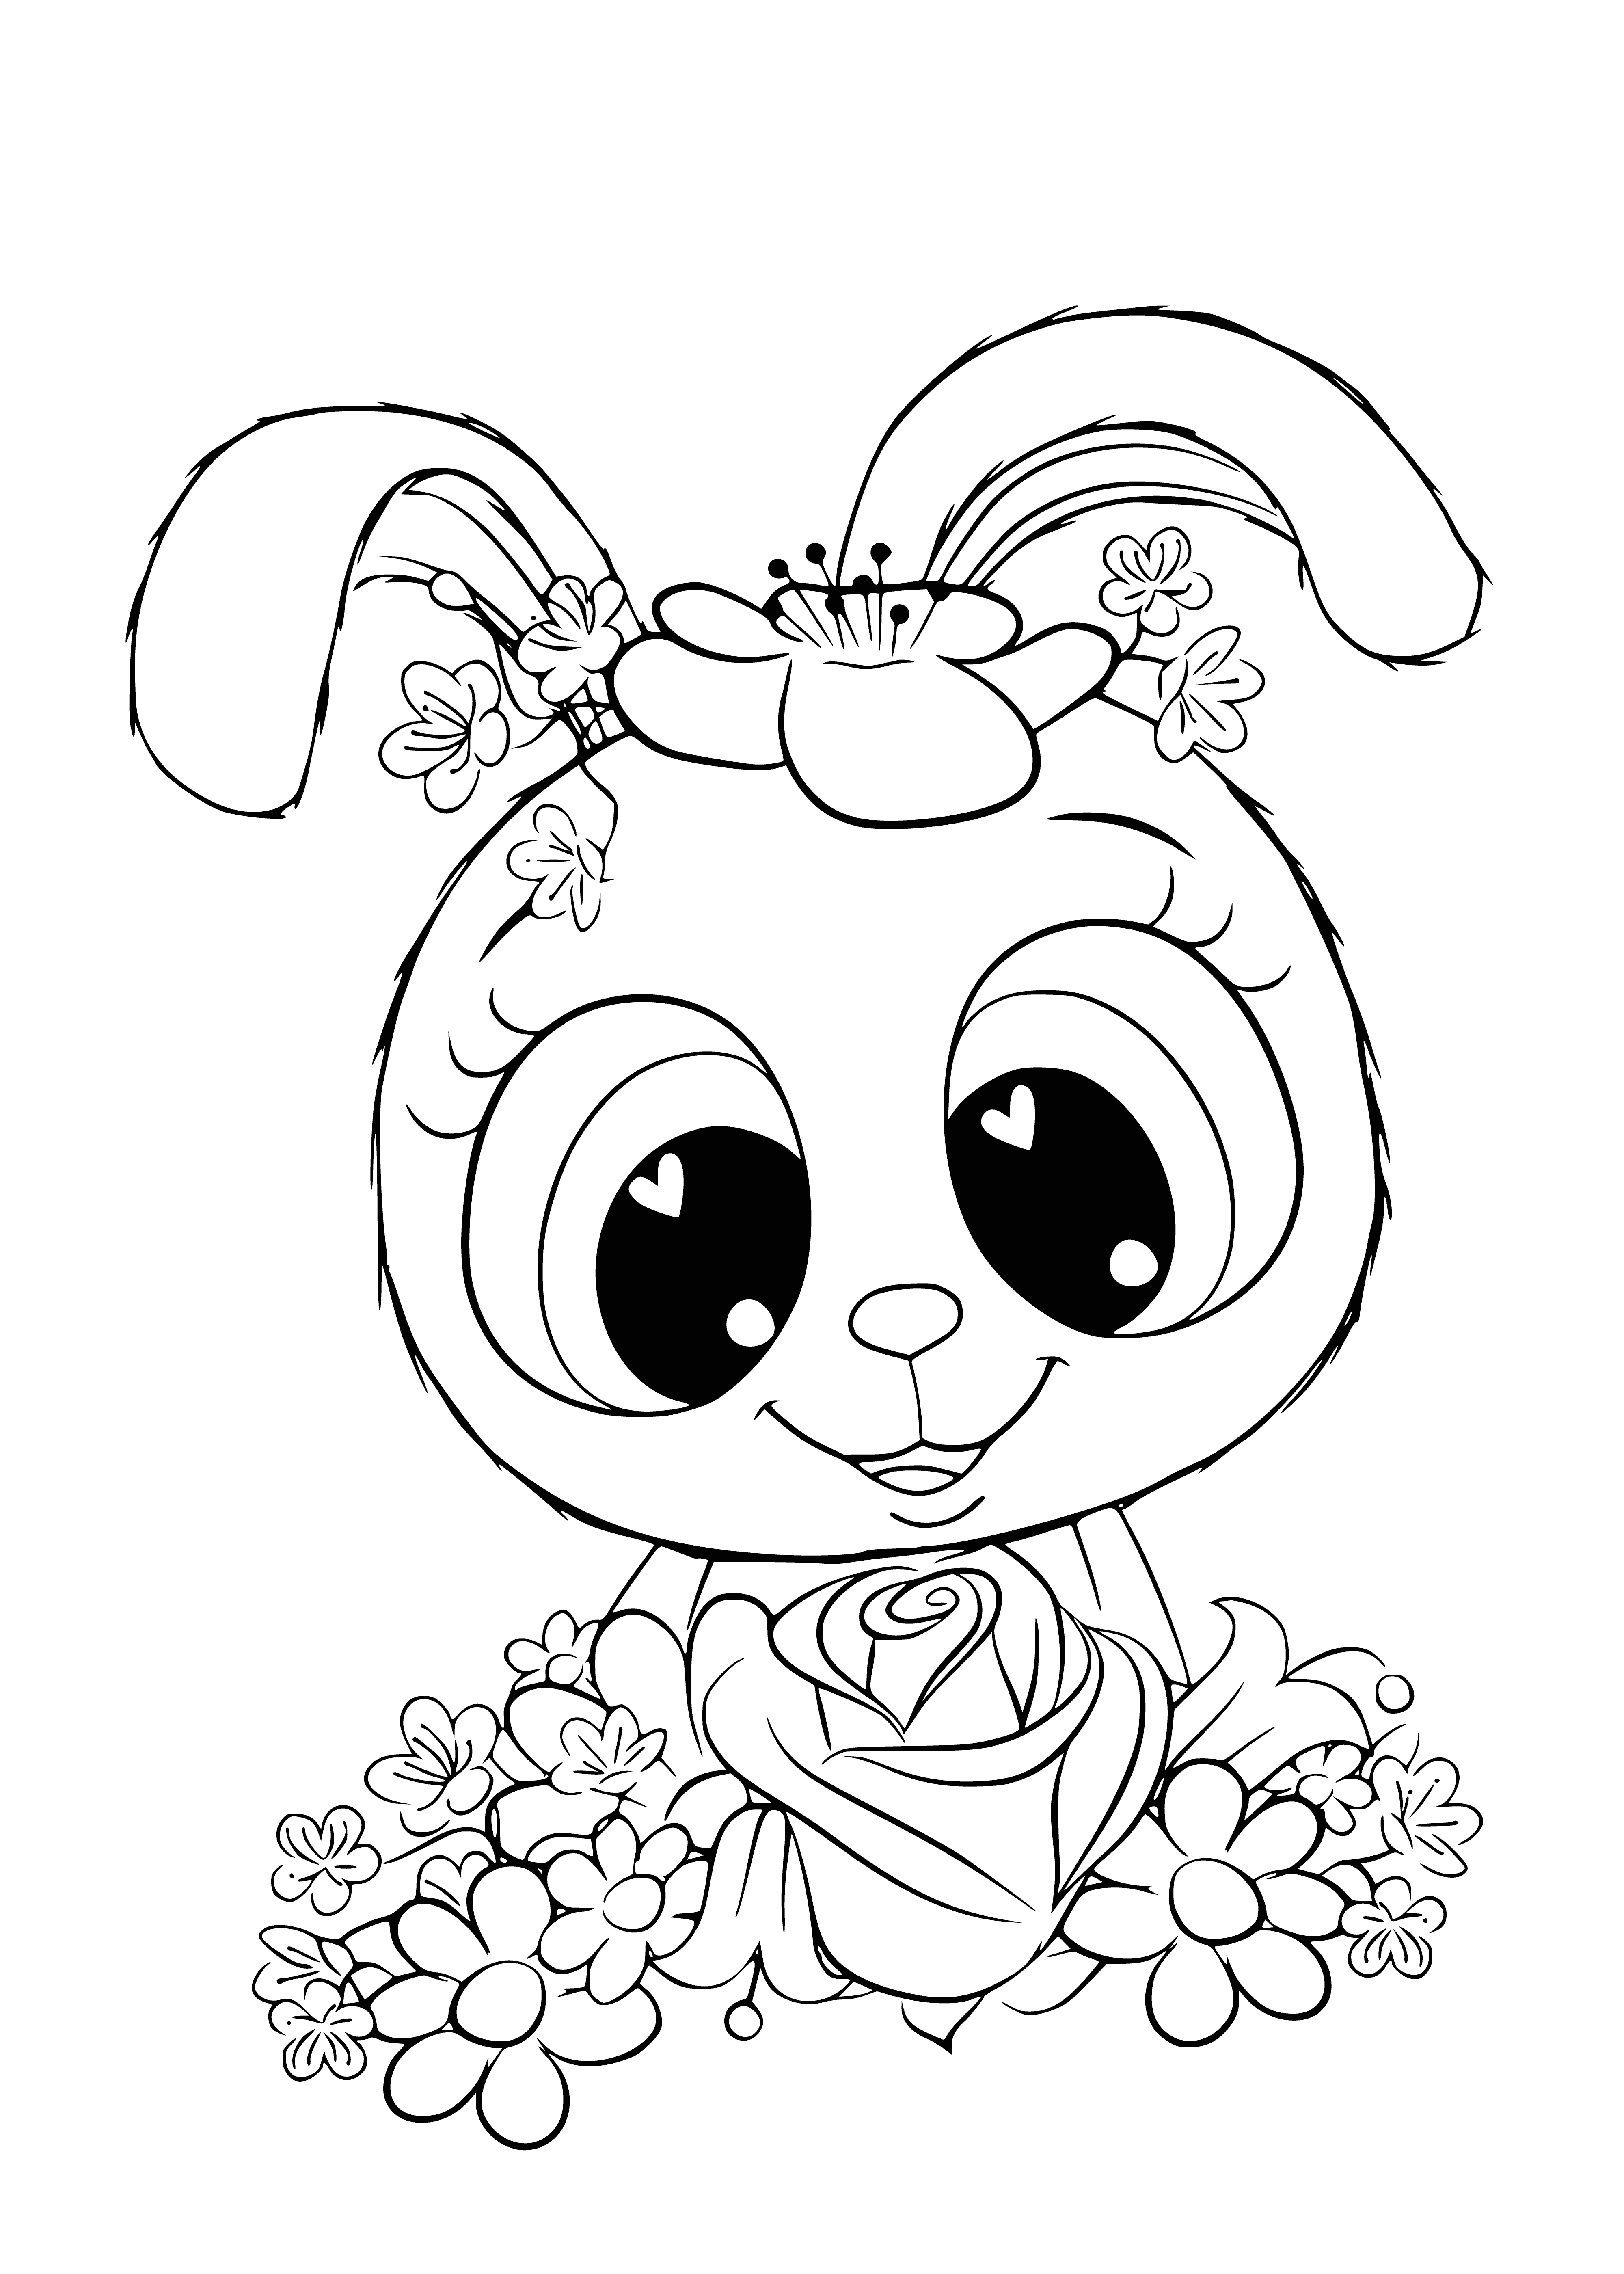 coloring page: A fluffy bunny with big ears, a bowtie, stars & hearts. Smiling & standing on two legs.